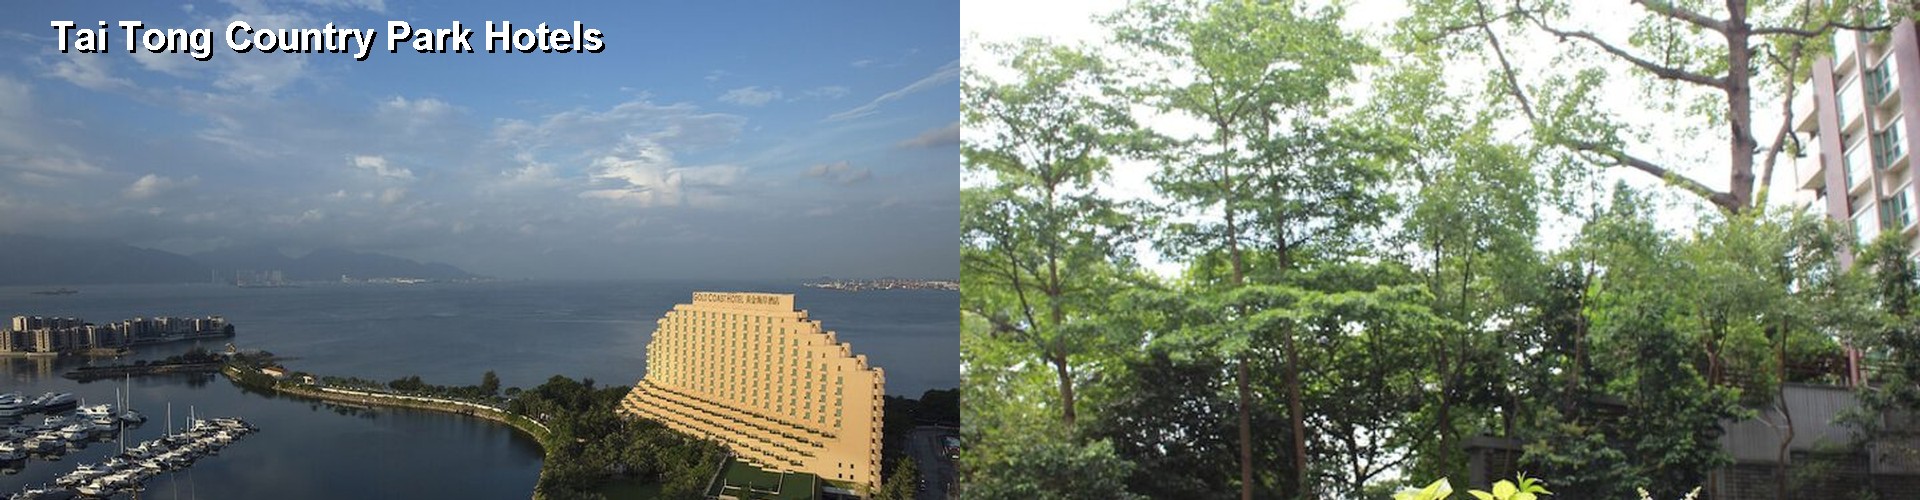 4 Best Hotels near Tai Tong Country Park